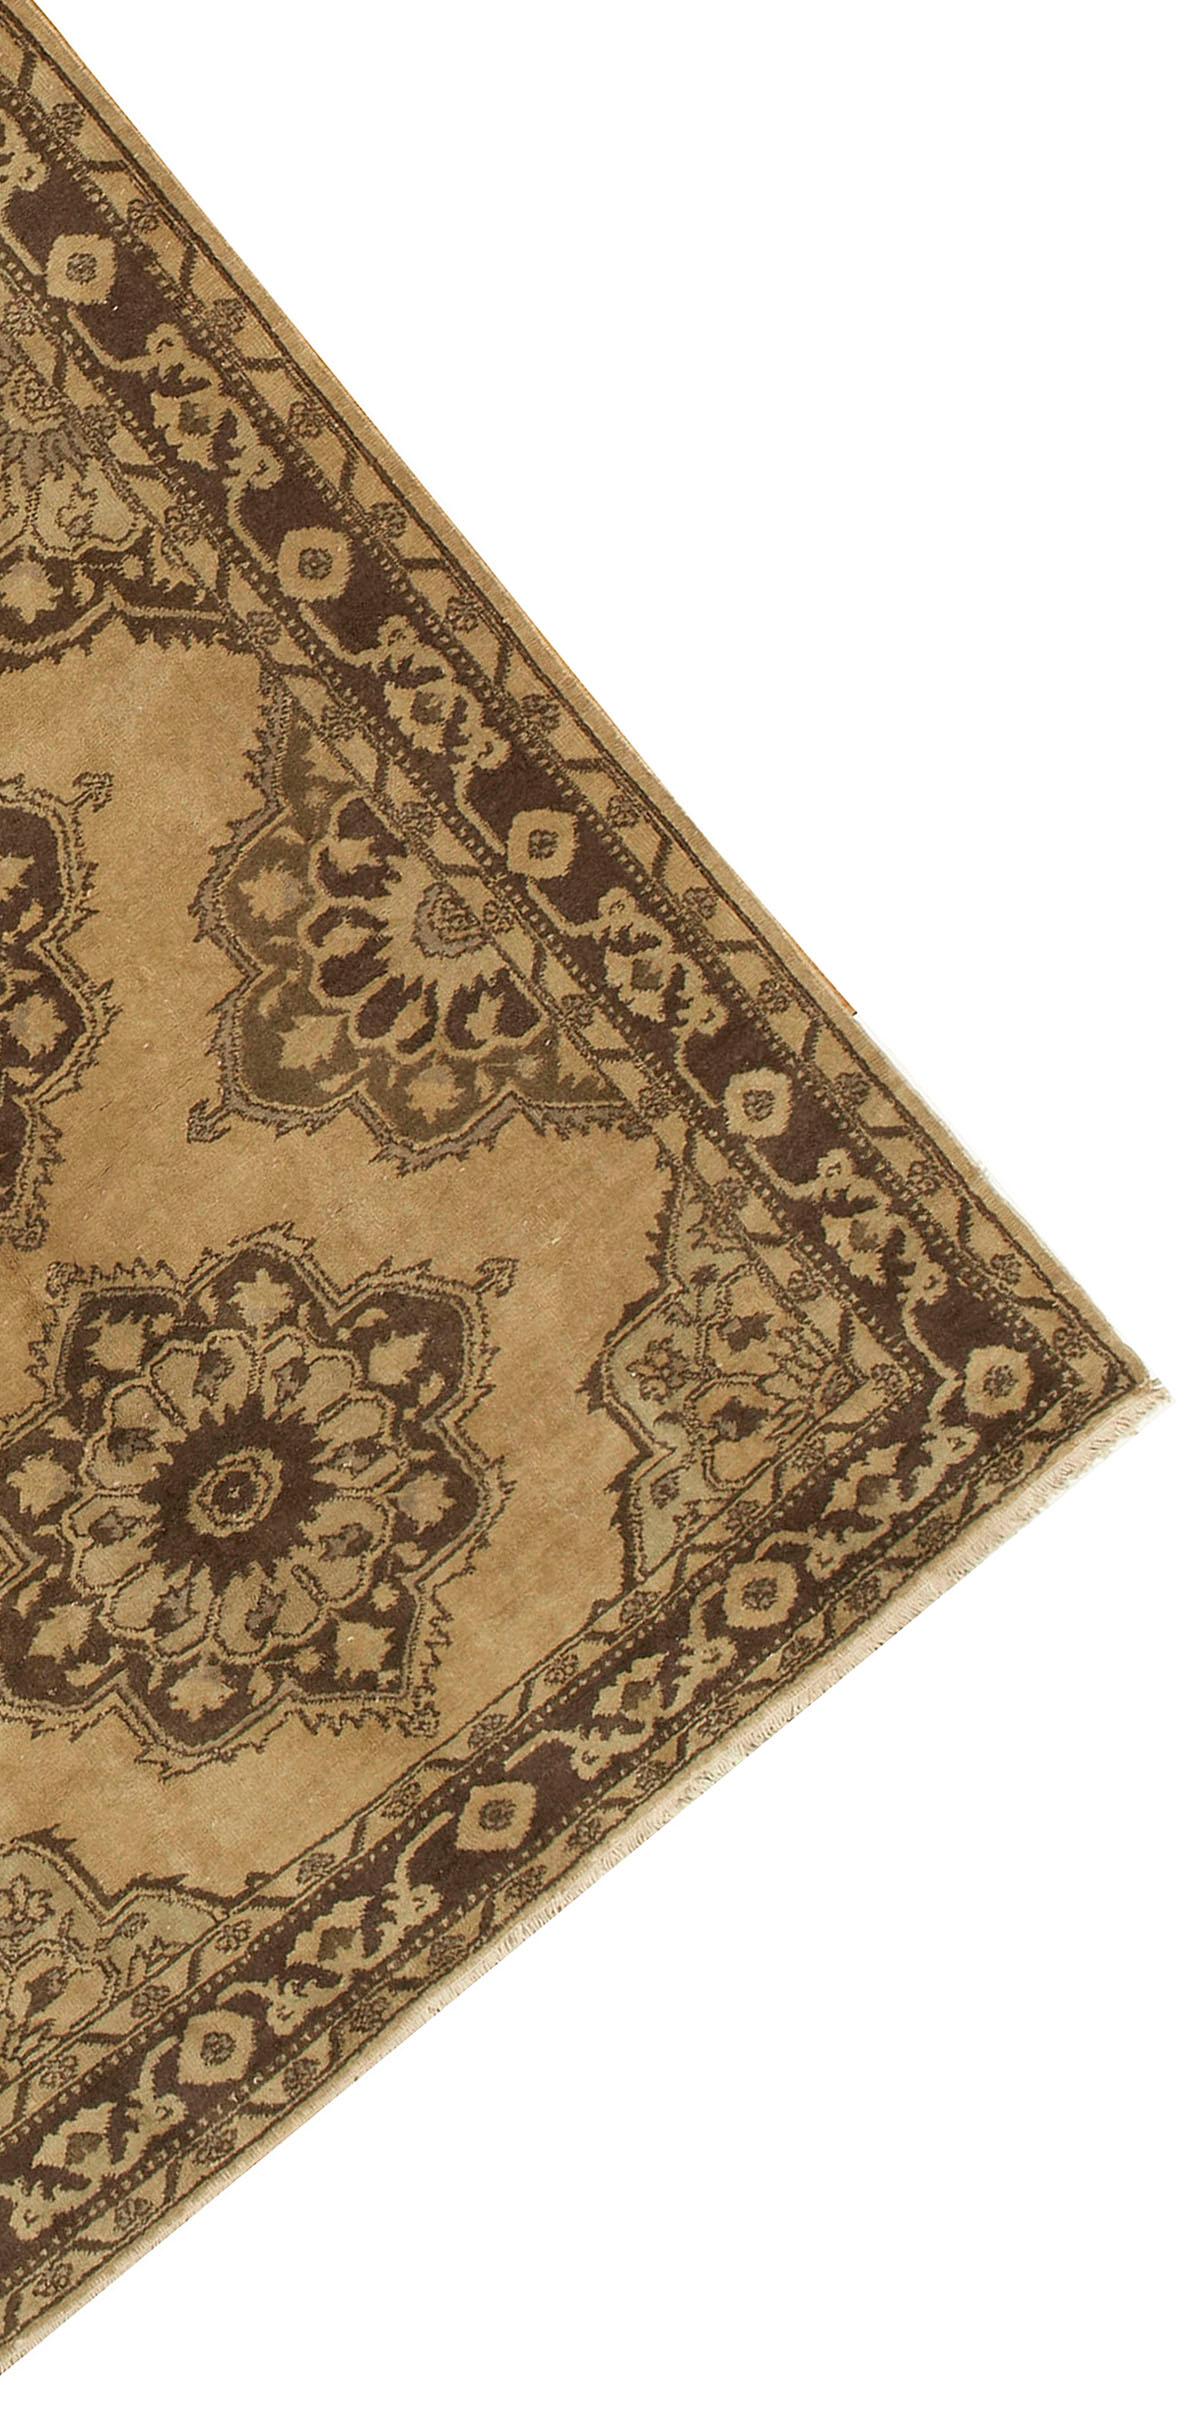 Turkish Oushak runner 4'9 x 12'6. Hand-woven in Turkey where rug weaving is the culture rather than a business. Rugs from Turkey are known for the high quality of their wool their beautiful patterns and warm colors. These designer favorites will